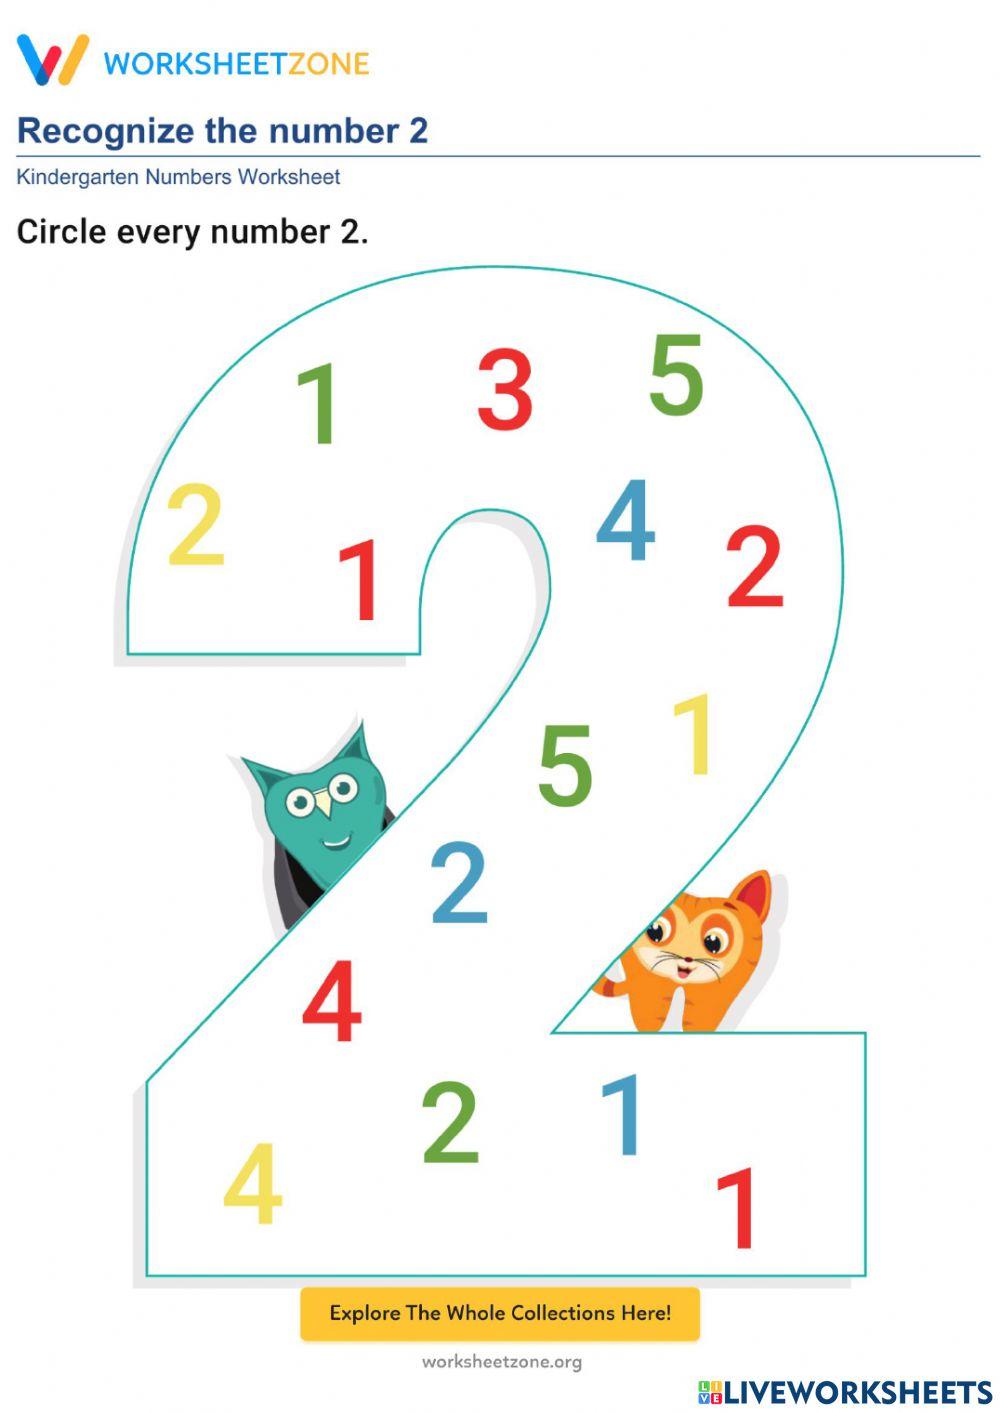 Number Recognition Activities 1 - 10